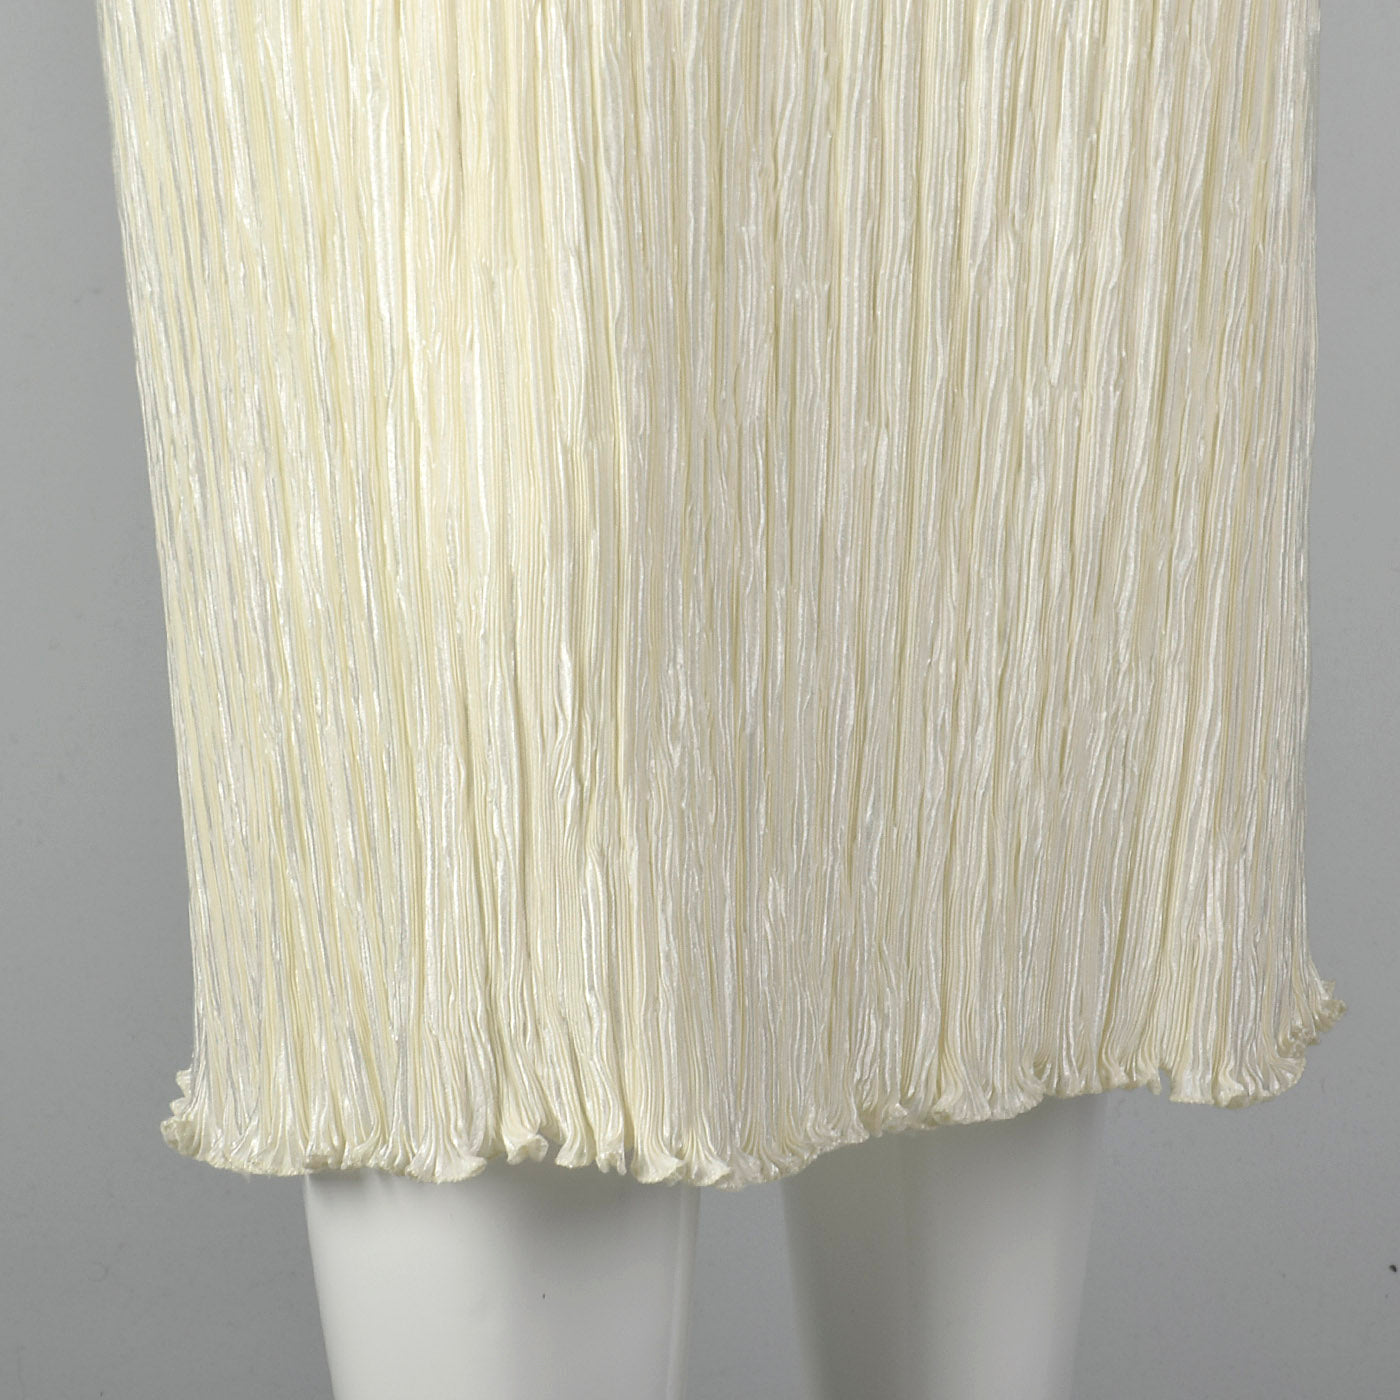 1970s Mary McFadden Couture Beaded and Pleated White Dress